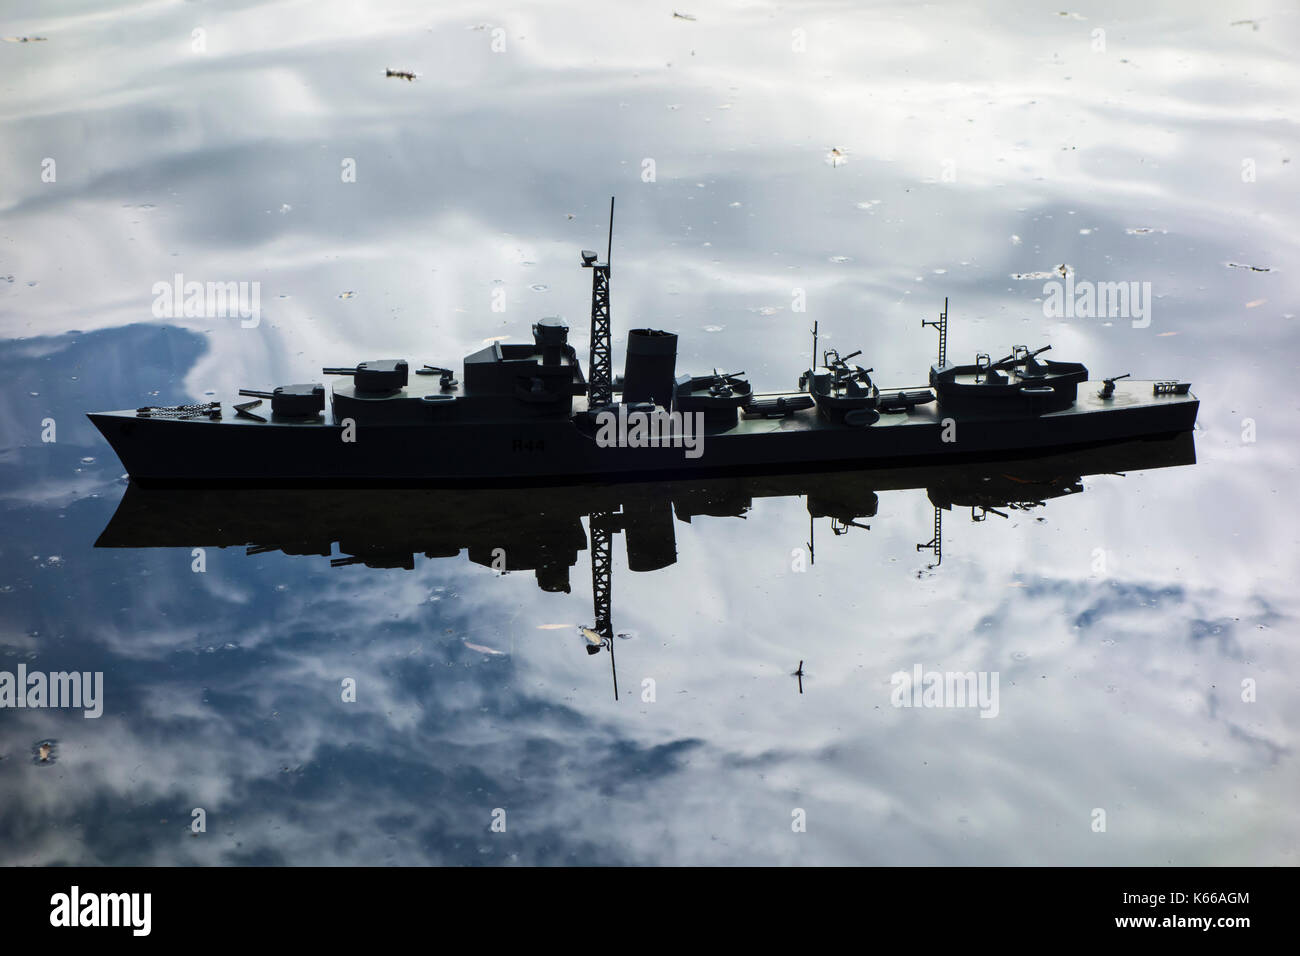 Model of Battle Class destroyer on water Stock Photo